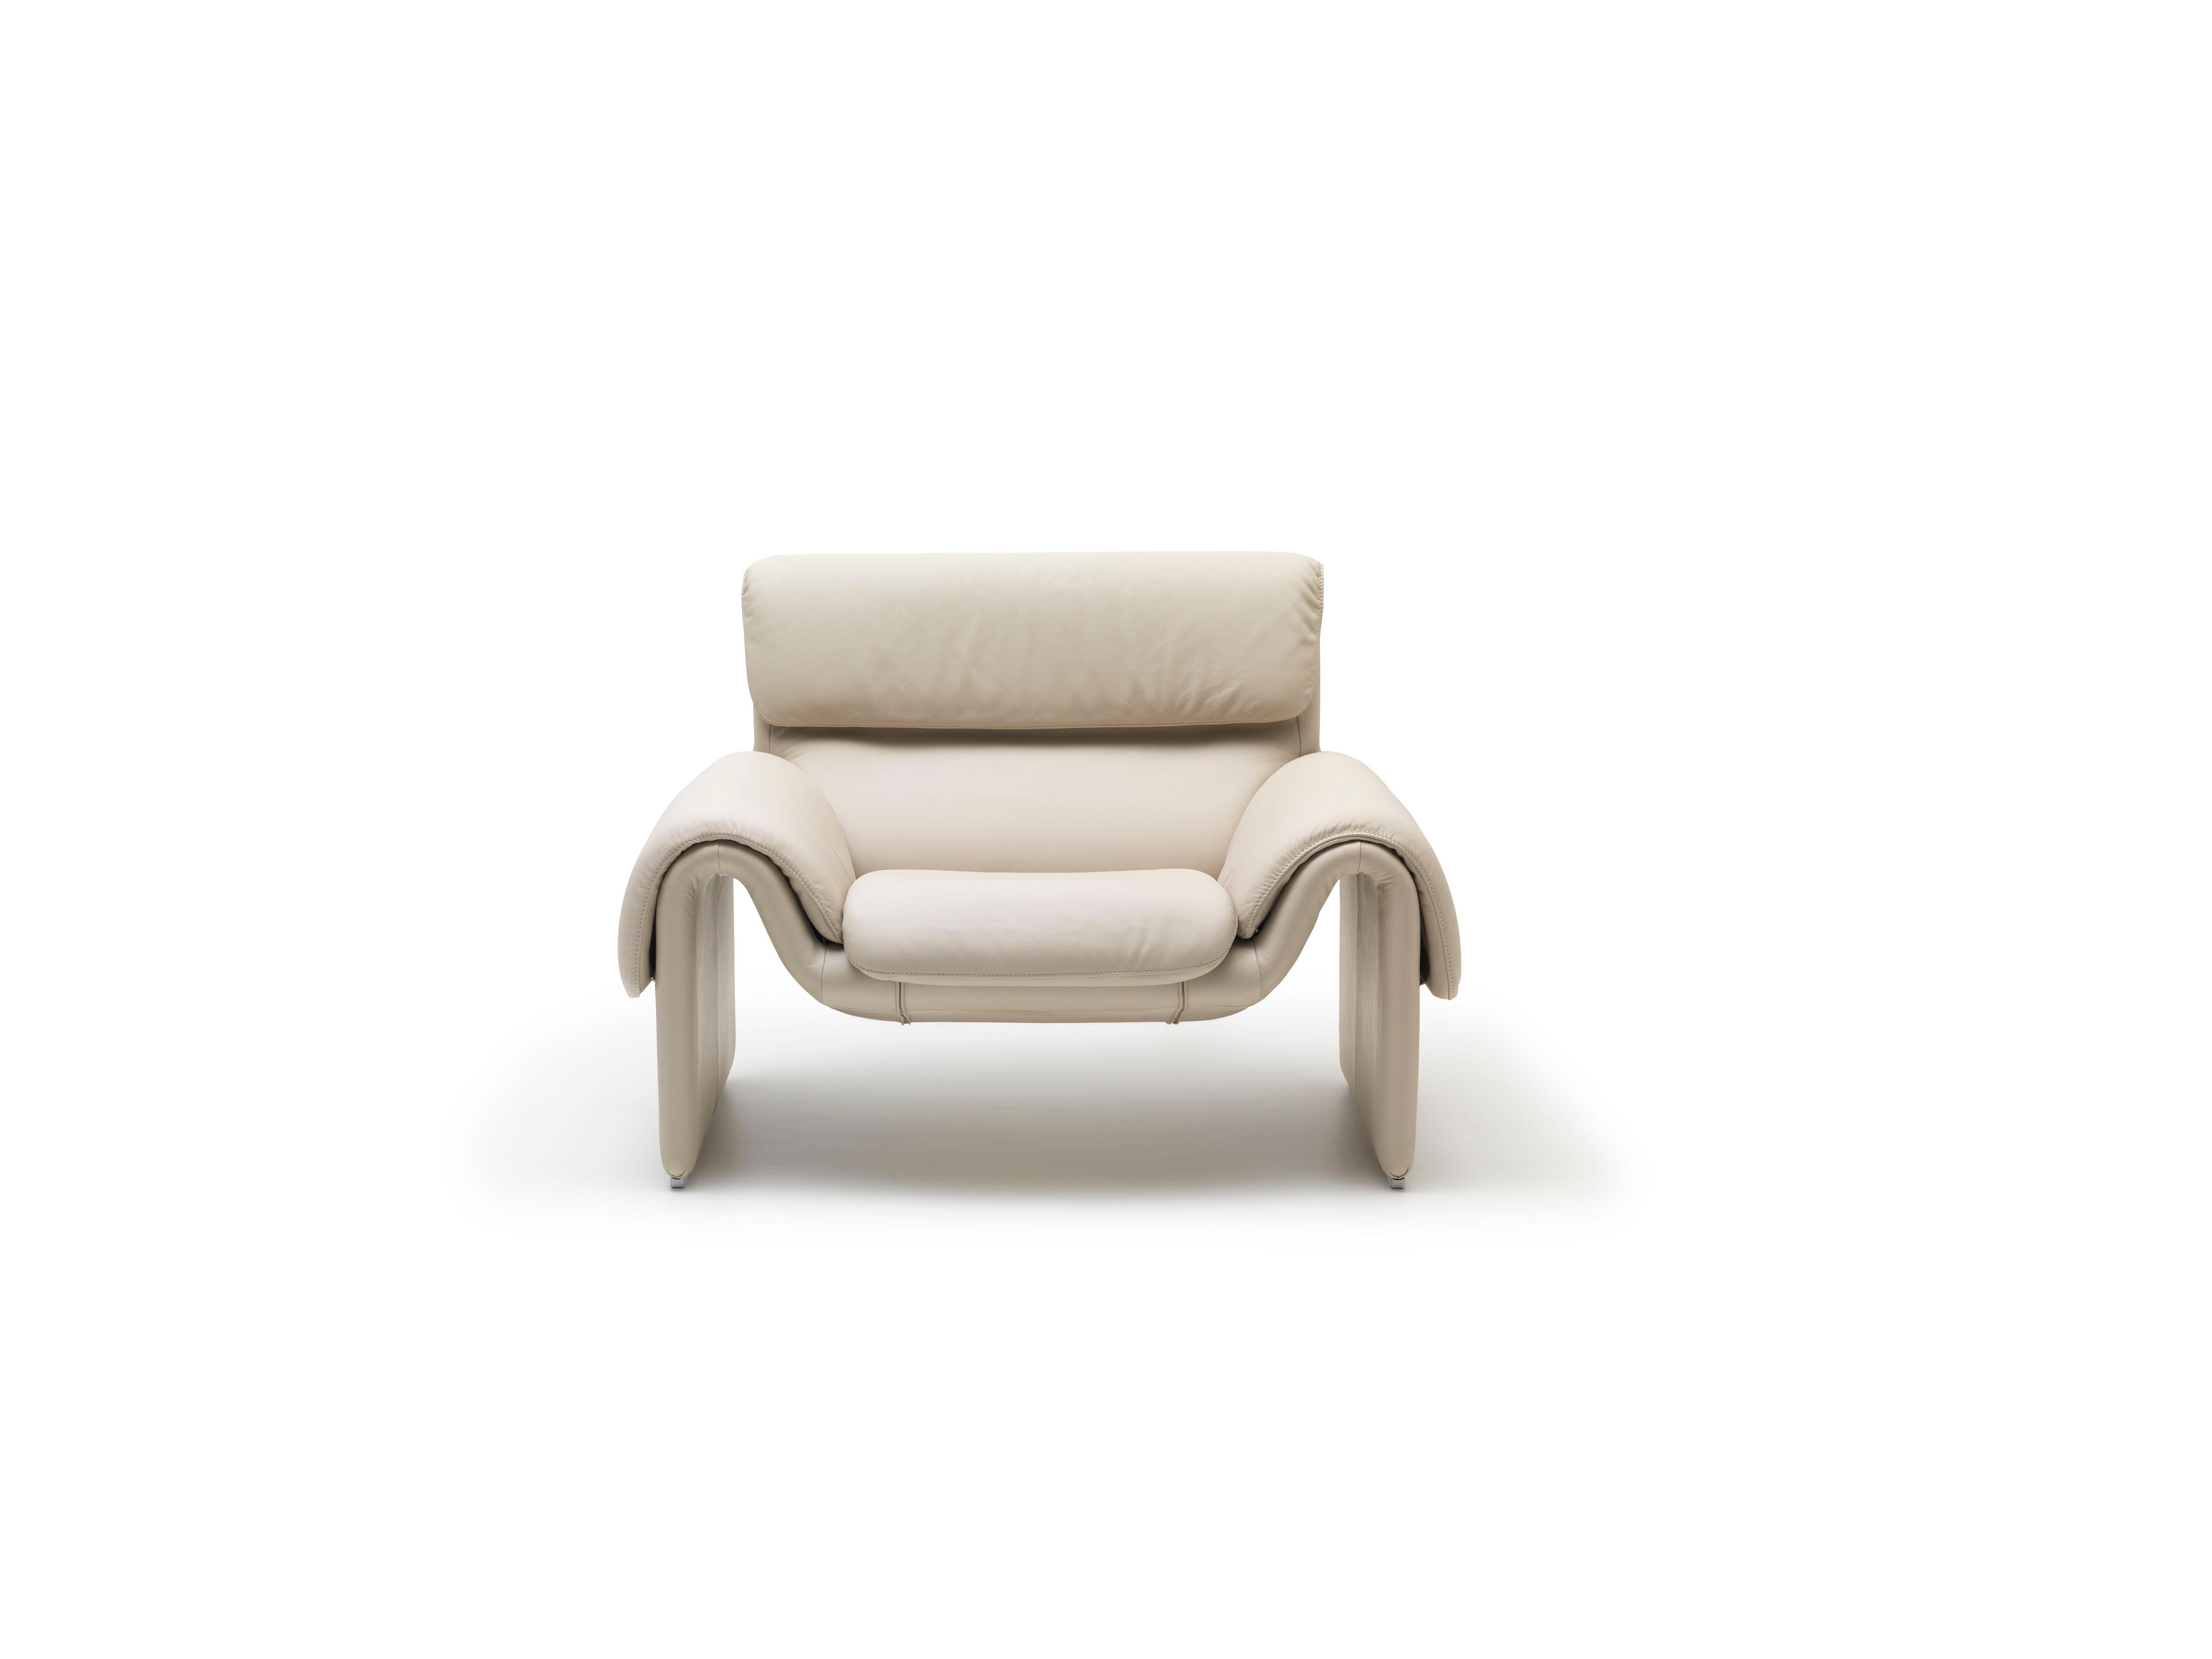 DS-2011 armchair by De Sede
Dimensions: D 59 x W 114 x H 84 cm
Materials: beechwood, leather

Prices may change according to the chosen materials and size. 

Aesthetics and functionality in a harmonious combination. An impressive design with a